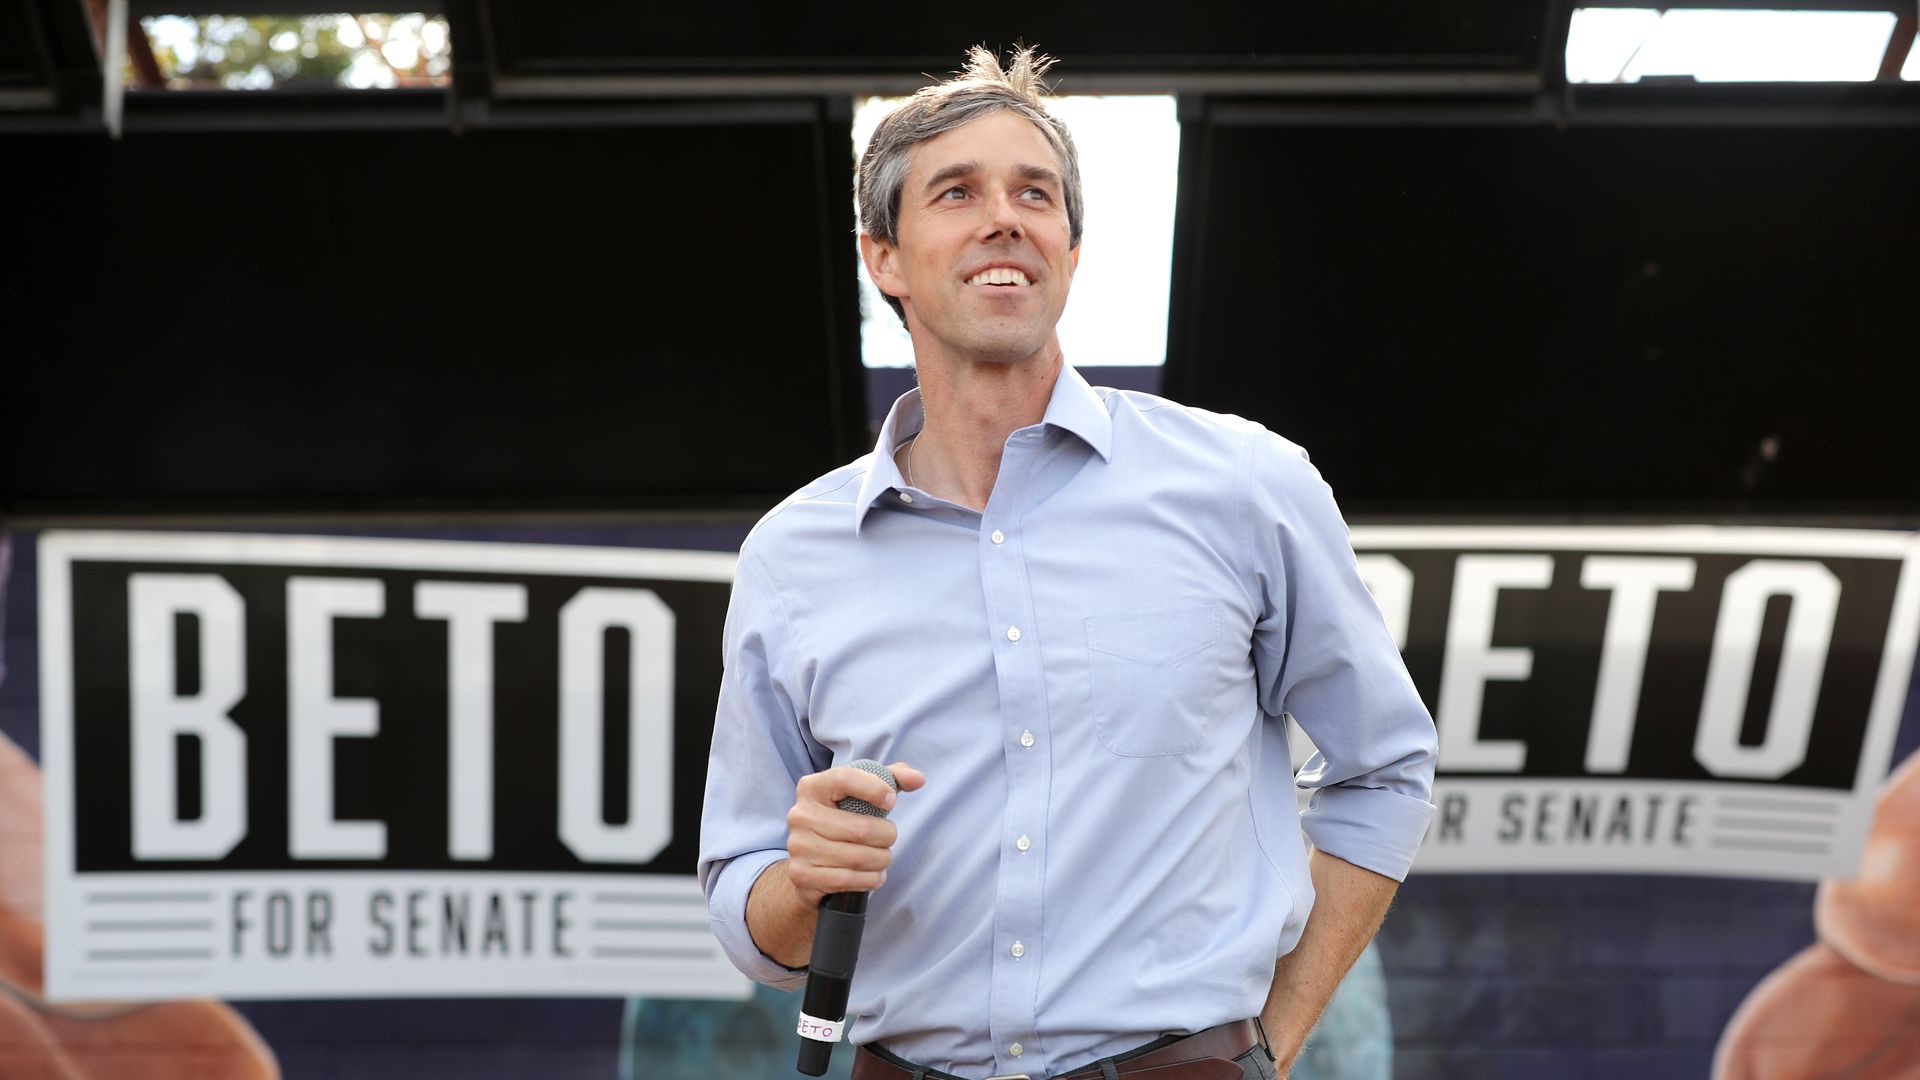 Majority of Iowa Democratic leaders want a young 2020 candidate - Axios